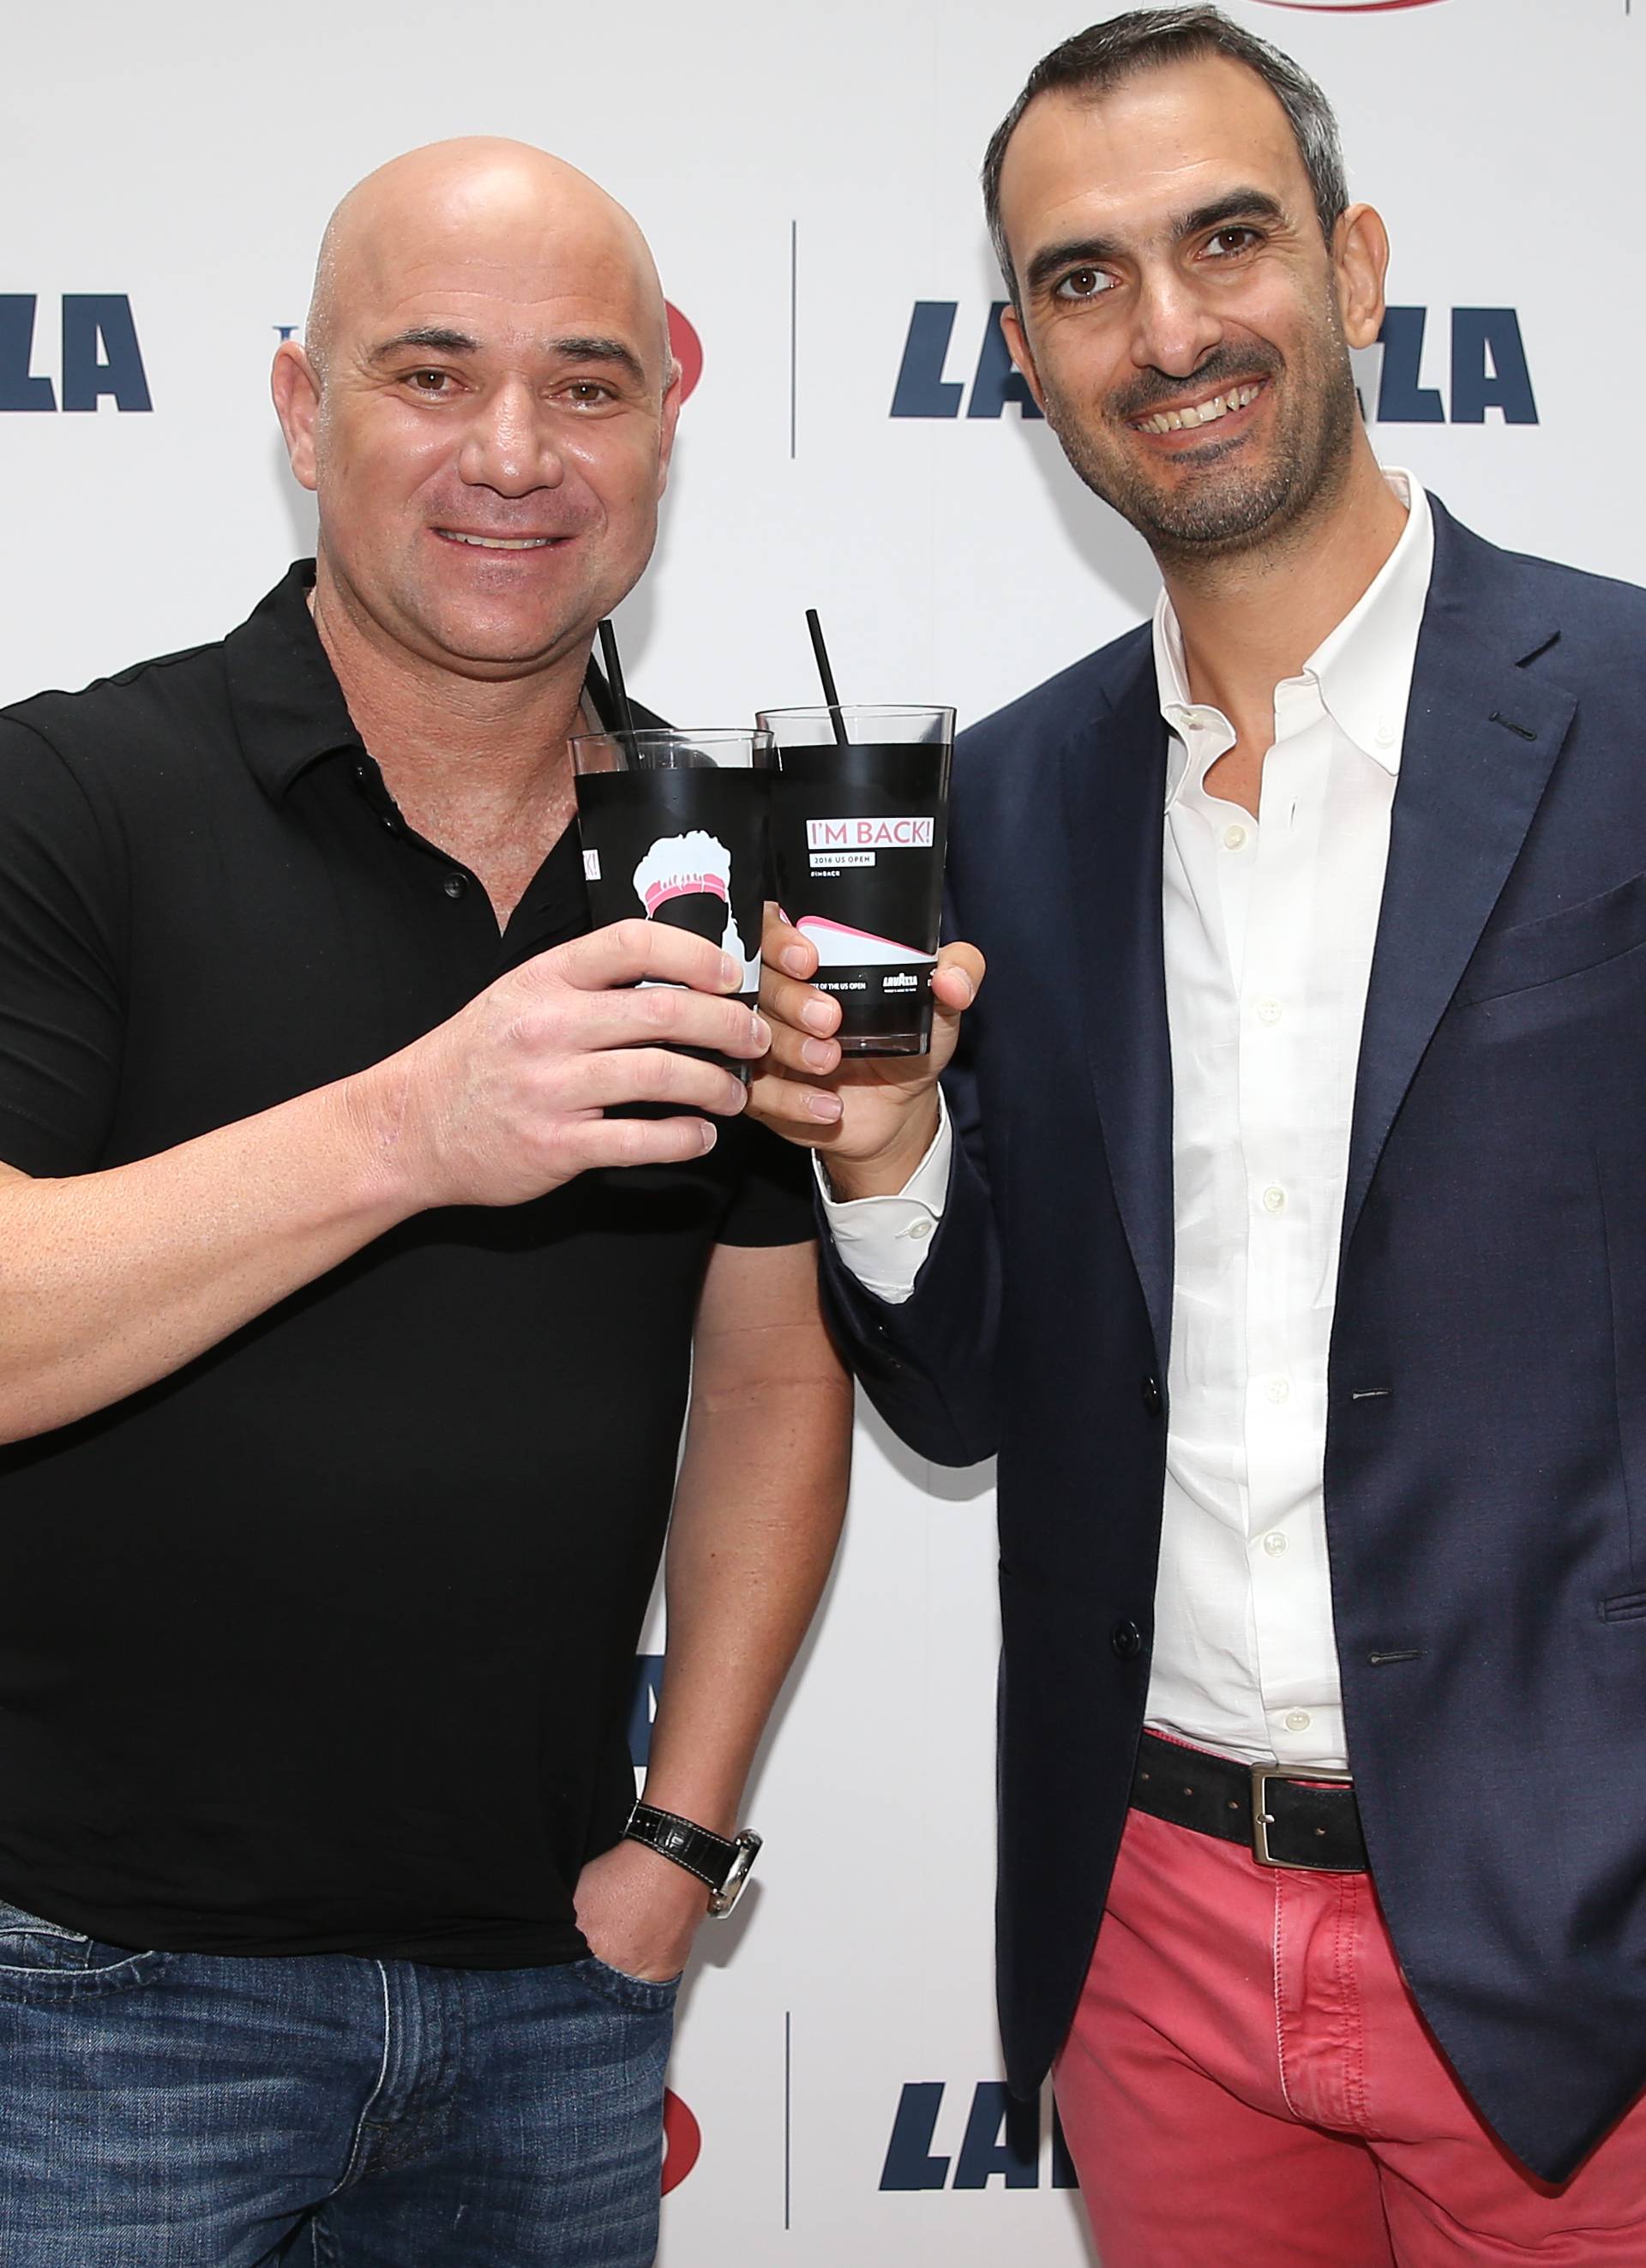 US OPEN: LAVAZZA PARTNERS WITH TENNIS LEGEND ANDRE AGASSI